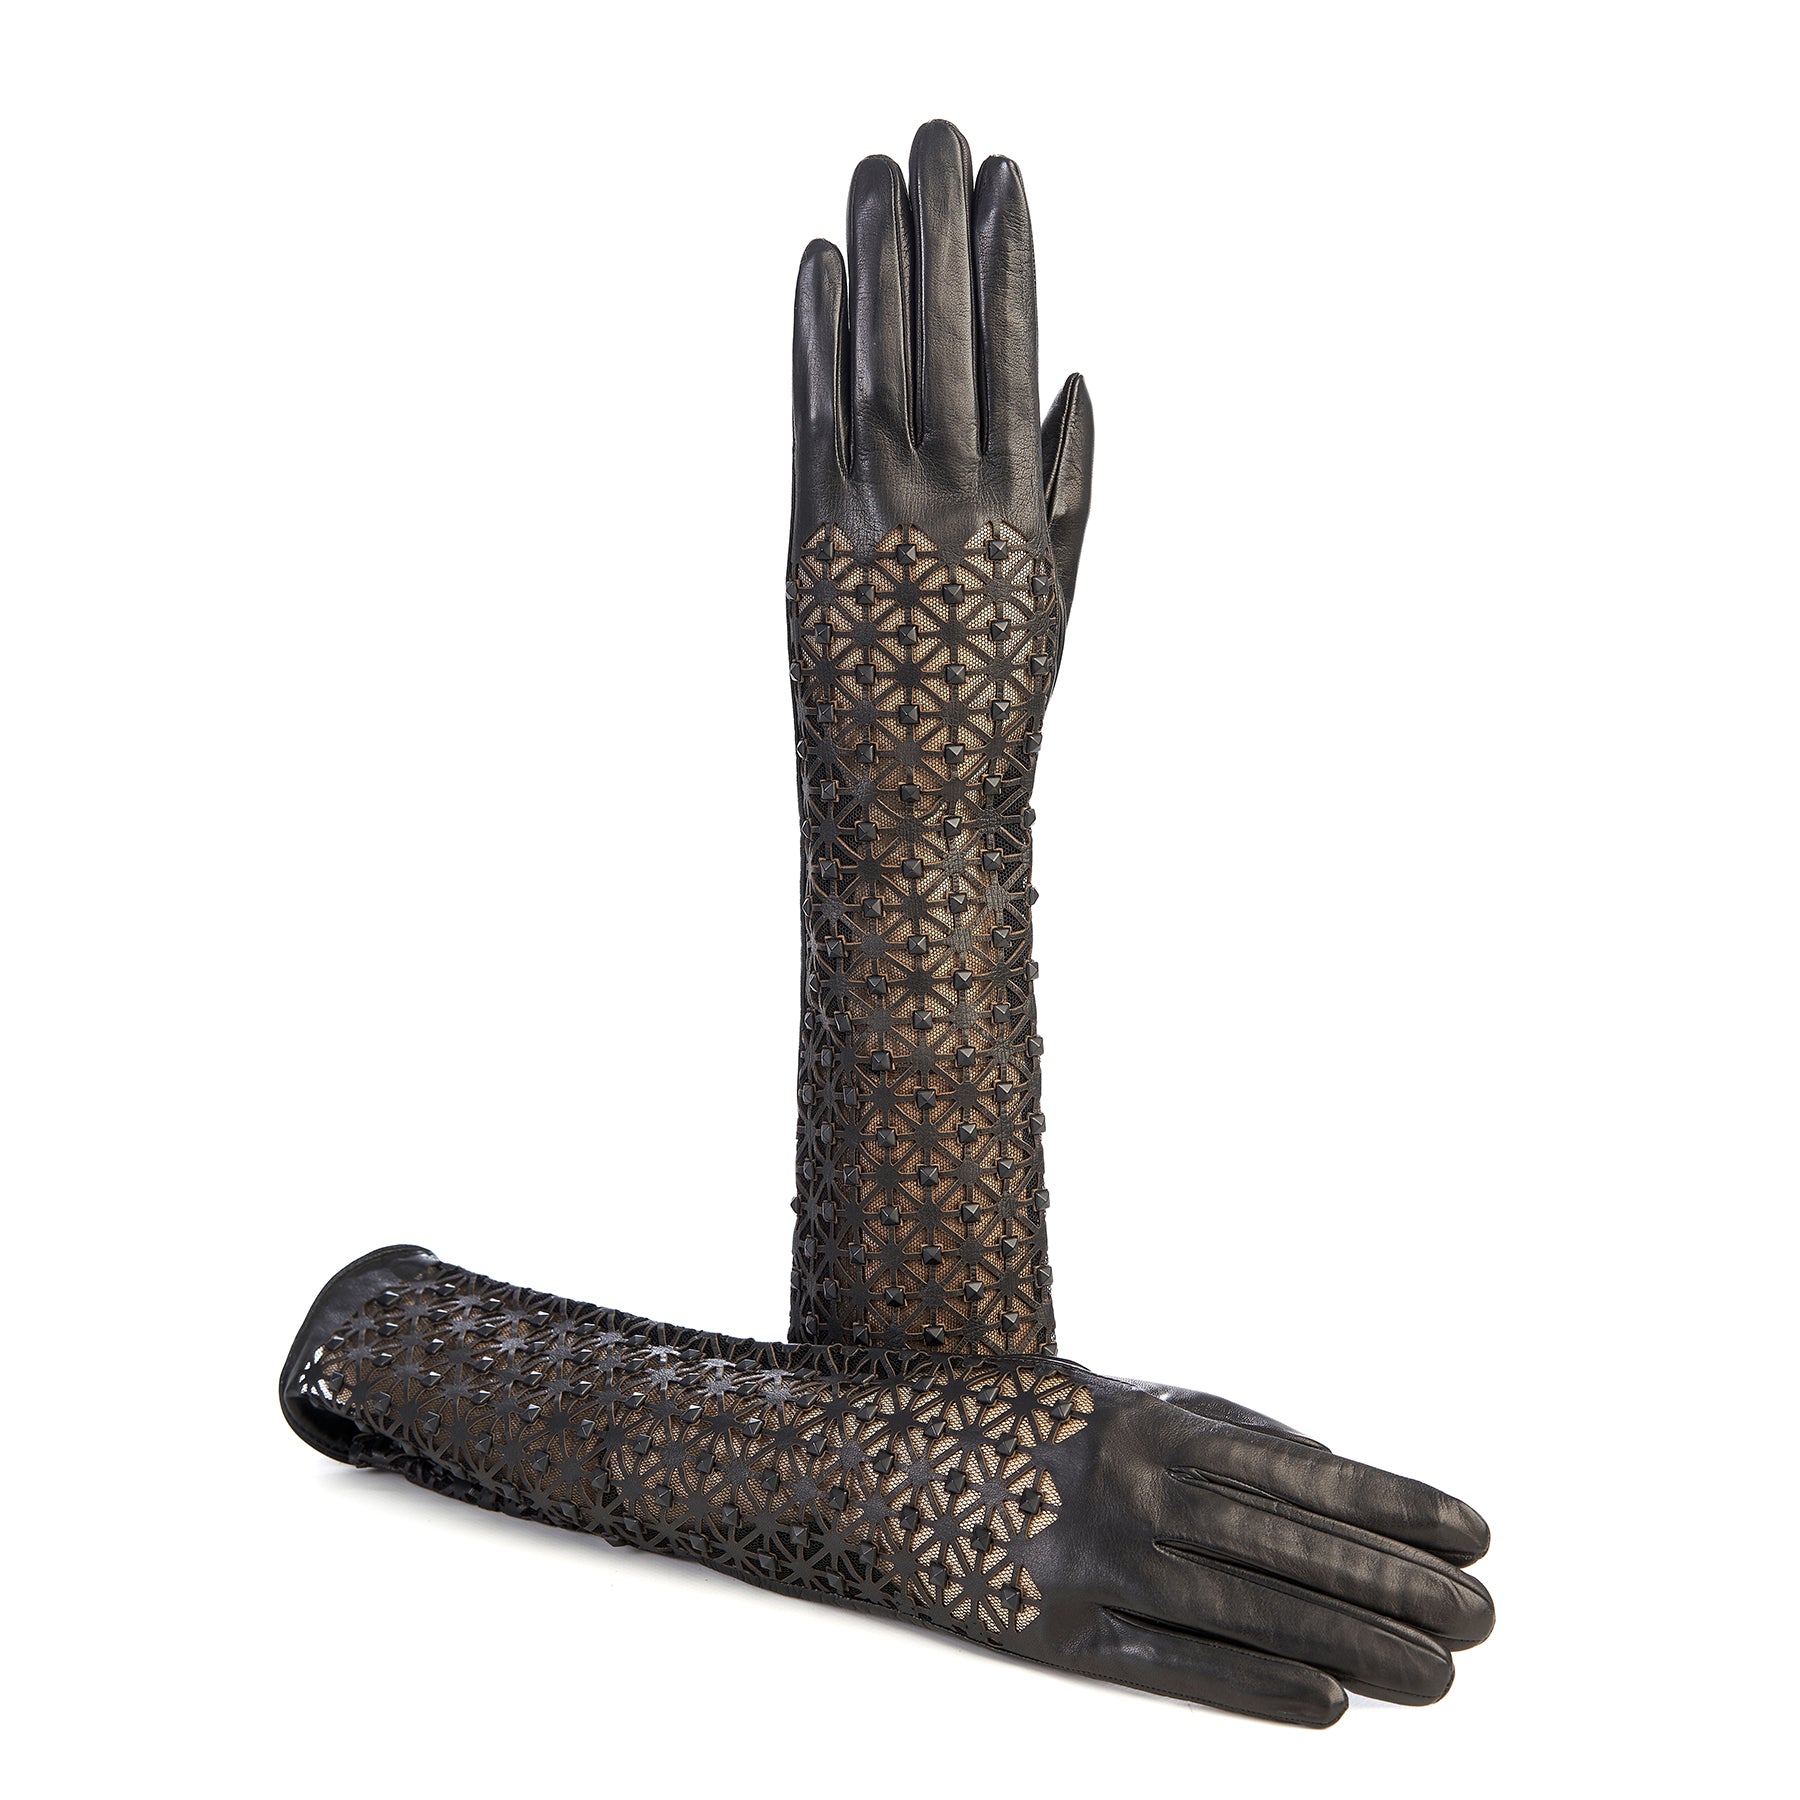 Ladies' exsclusive long unlined black leather gloves with studs